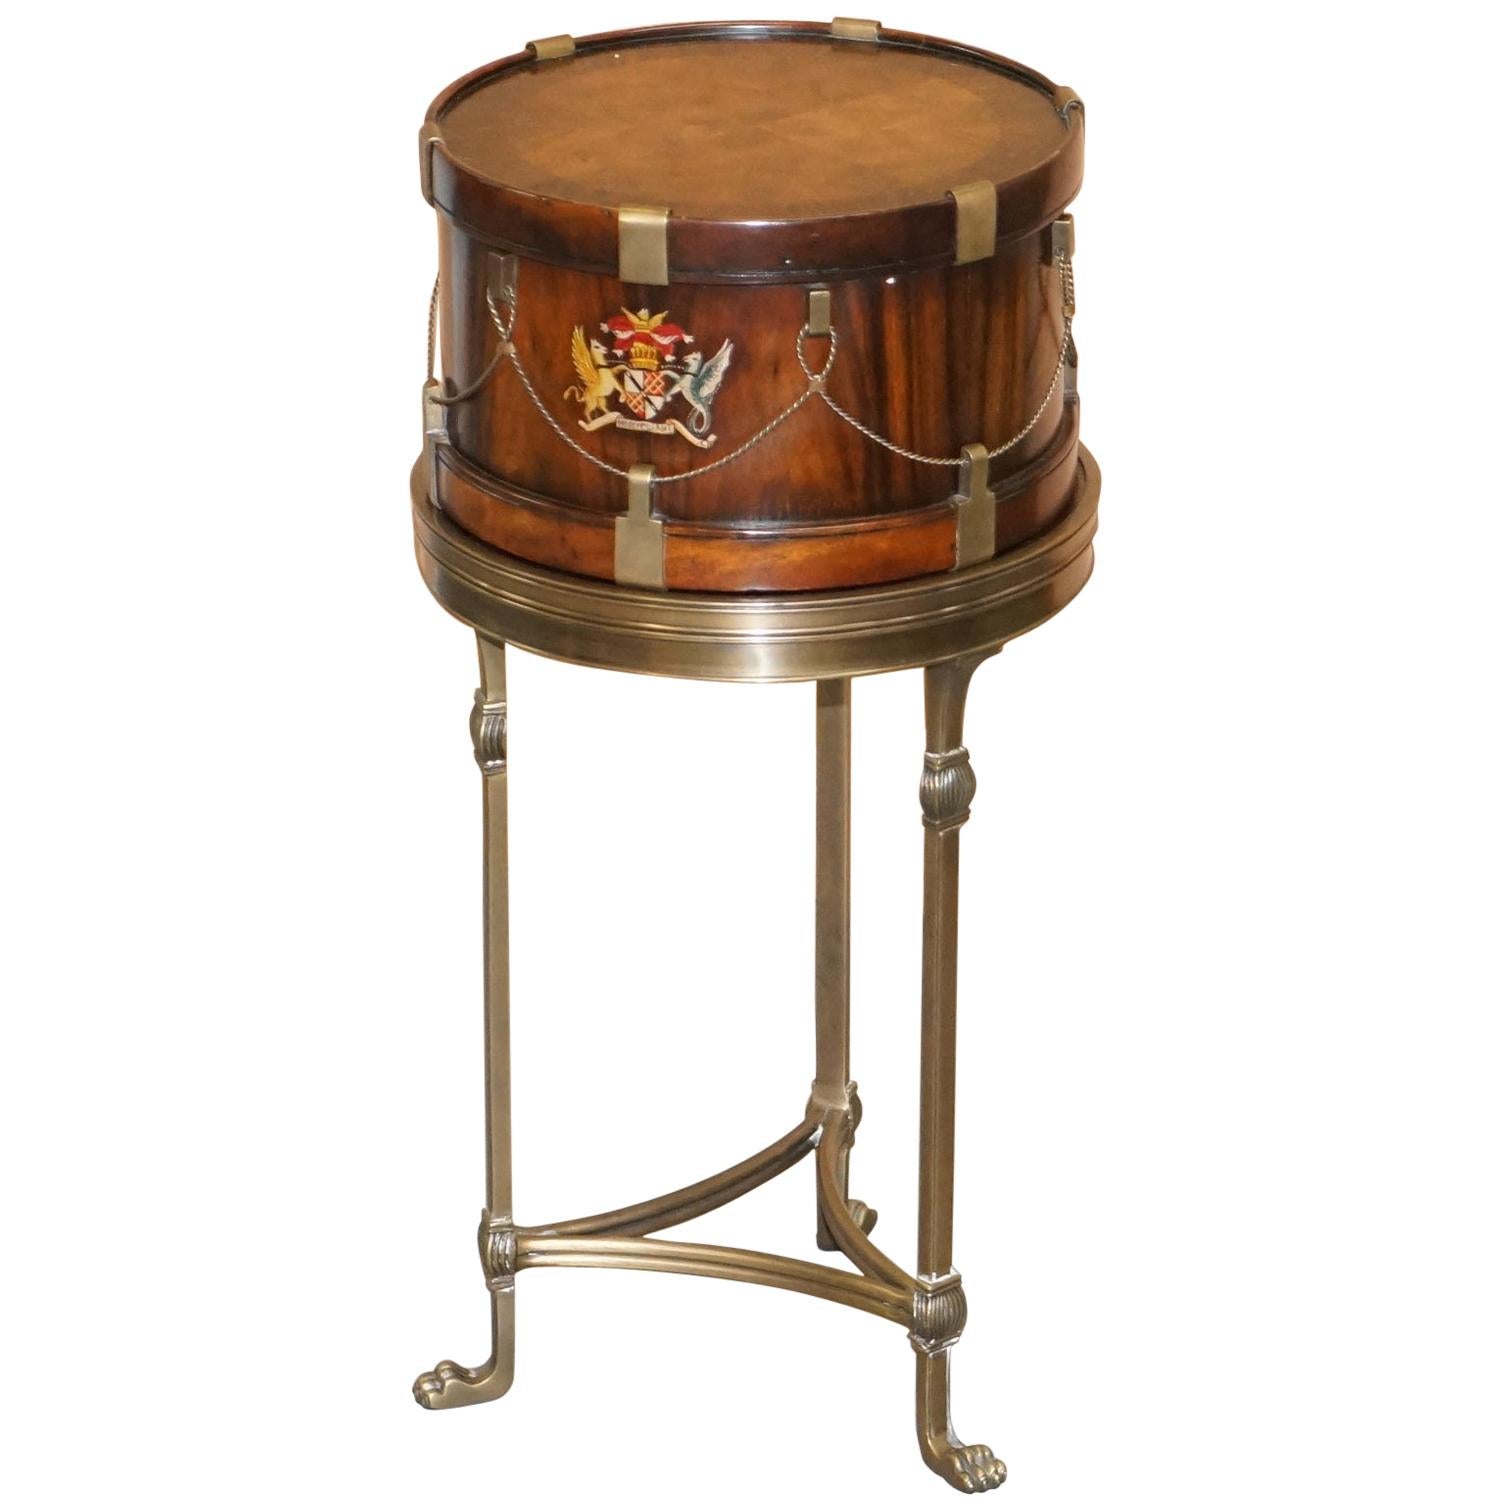 Stunning Little Side Table with Hand Painted Armorial Crests in the Form of Drum